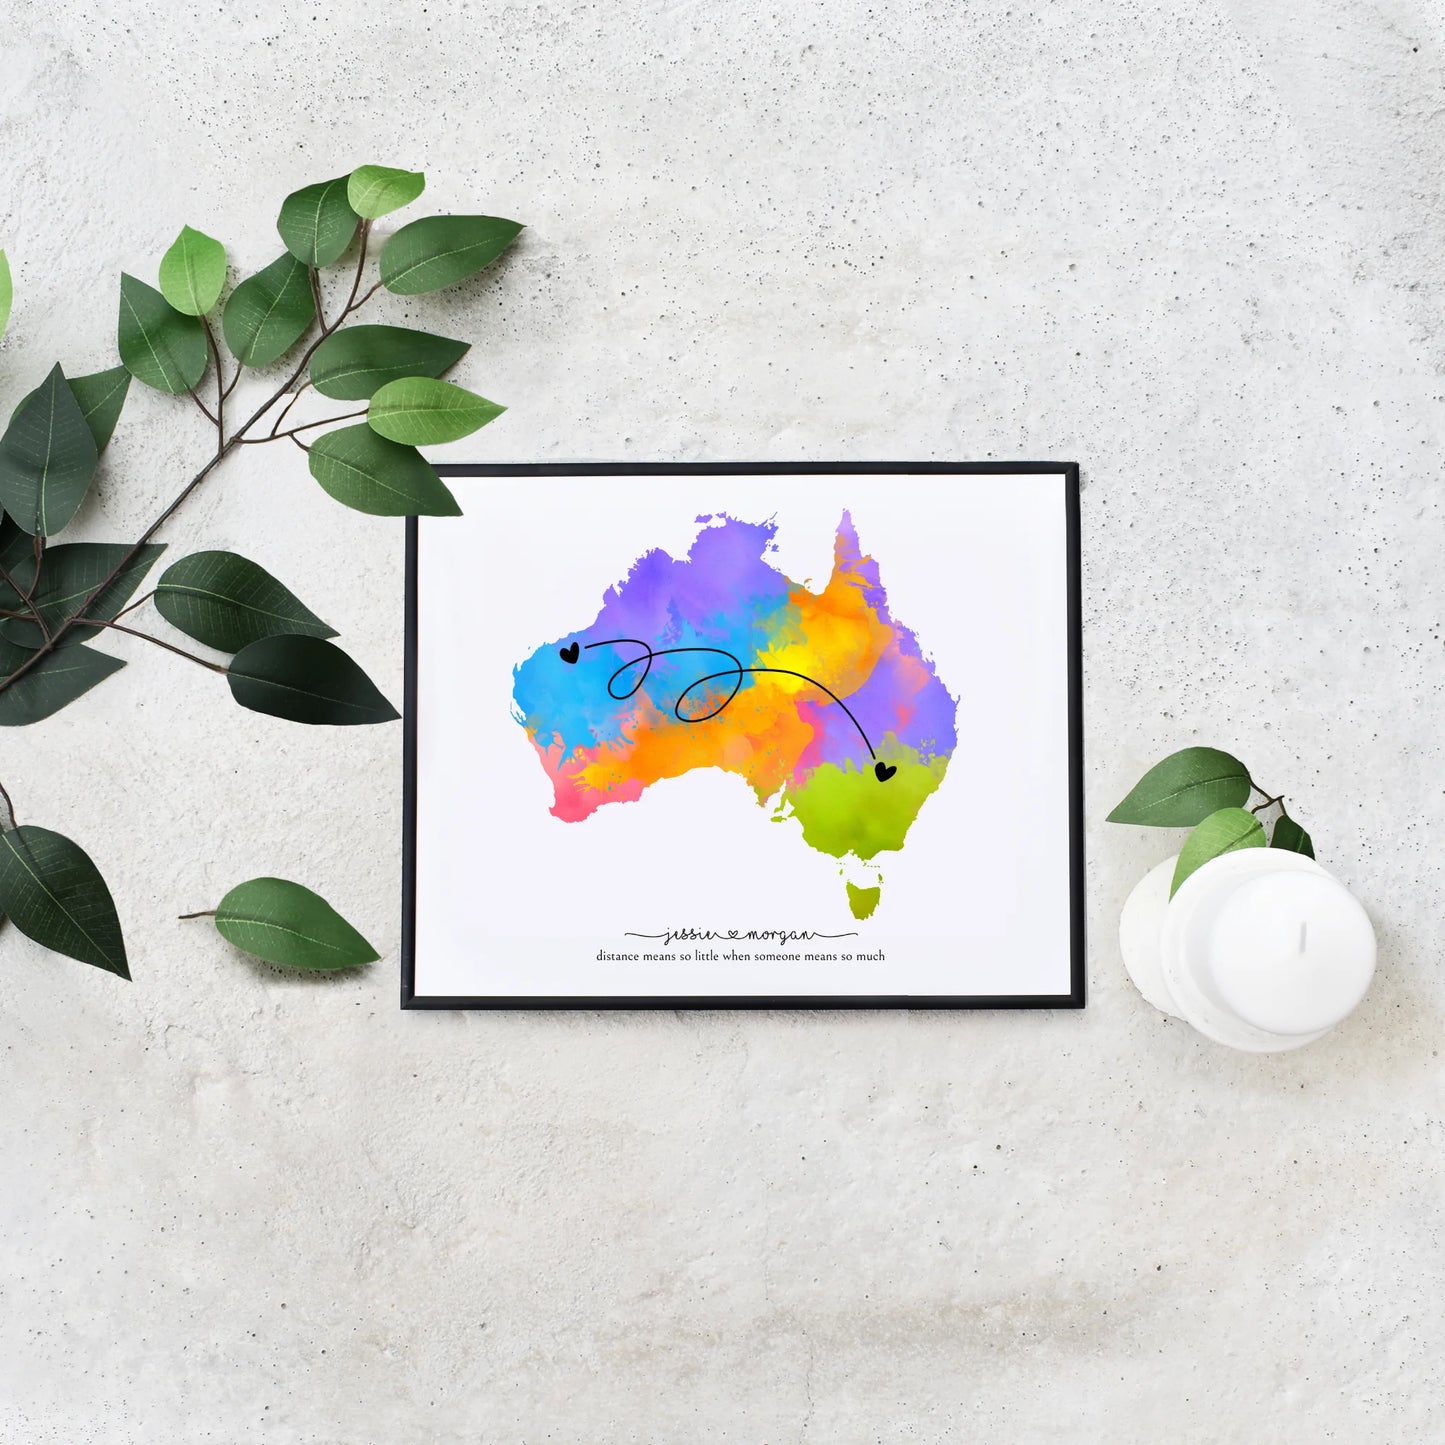 Editable Australia Love Map Long Distance Anniversary Gifts for Him